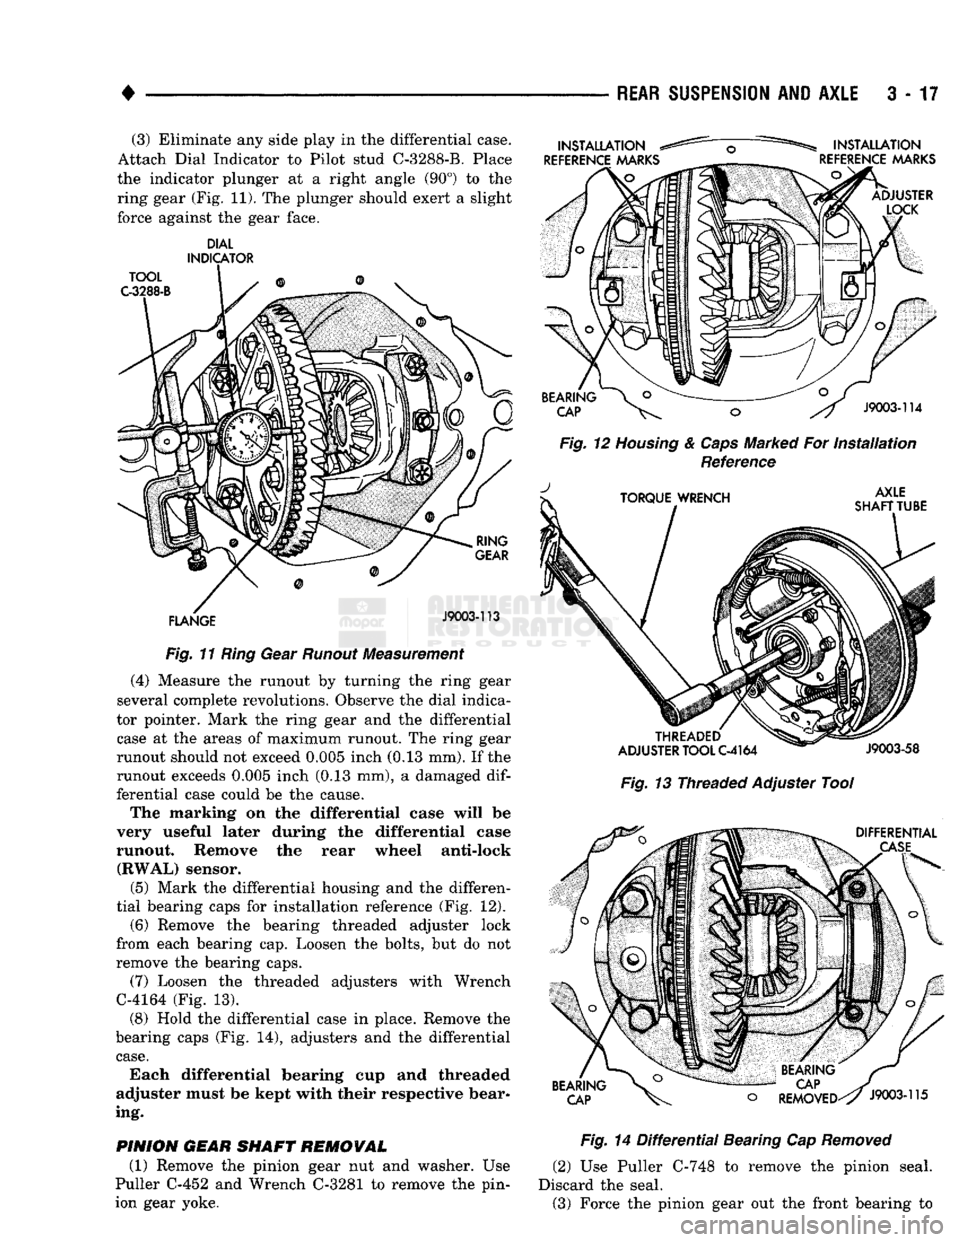 DODGE TRUCK 1993  Service Service Manual 
REAR SUSPENSION
 ANi
 AXLE
 3 - 17 
(3) Eliminate any side play in the differential case. 
Attach Dial Indicator to Pilot stud C-3288-B. Place 
the indicator plunger at a right angle (90°) to the  r